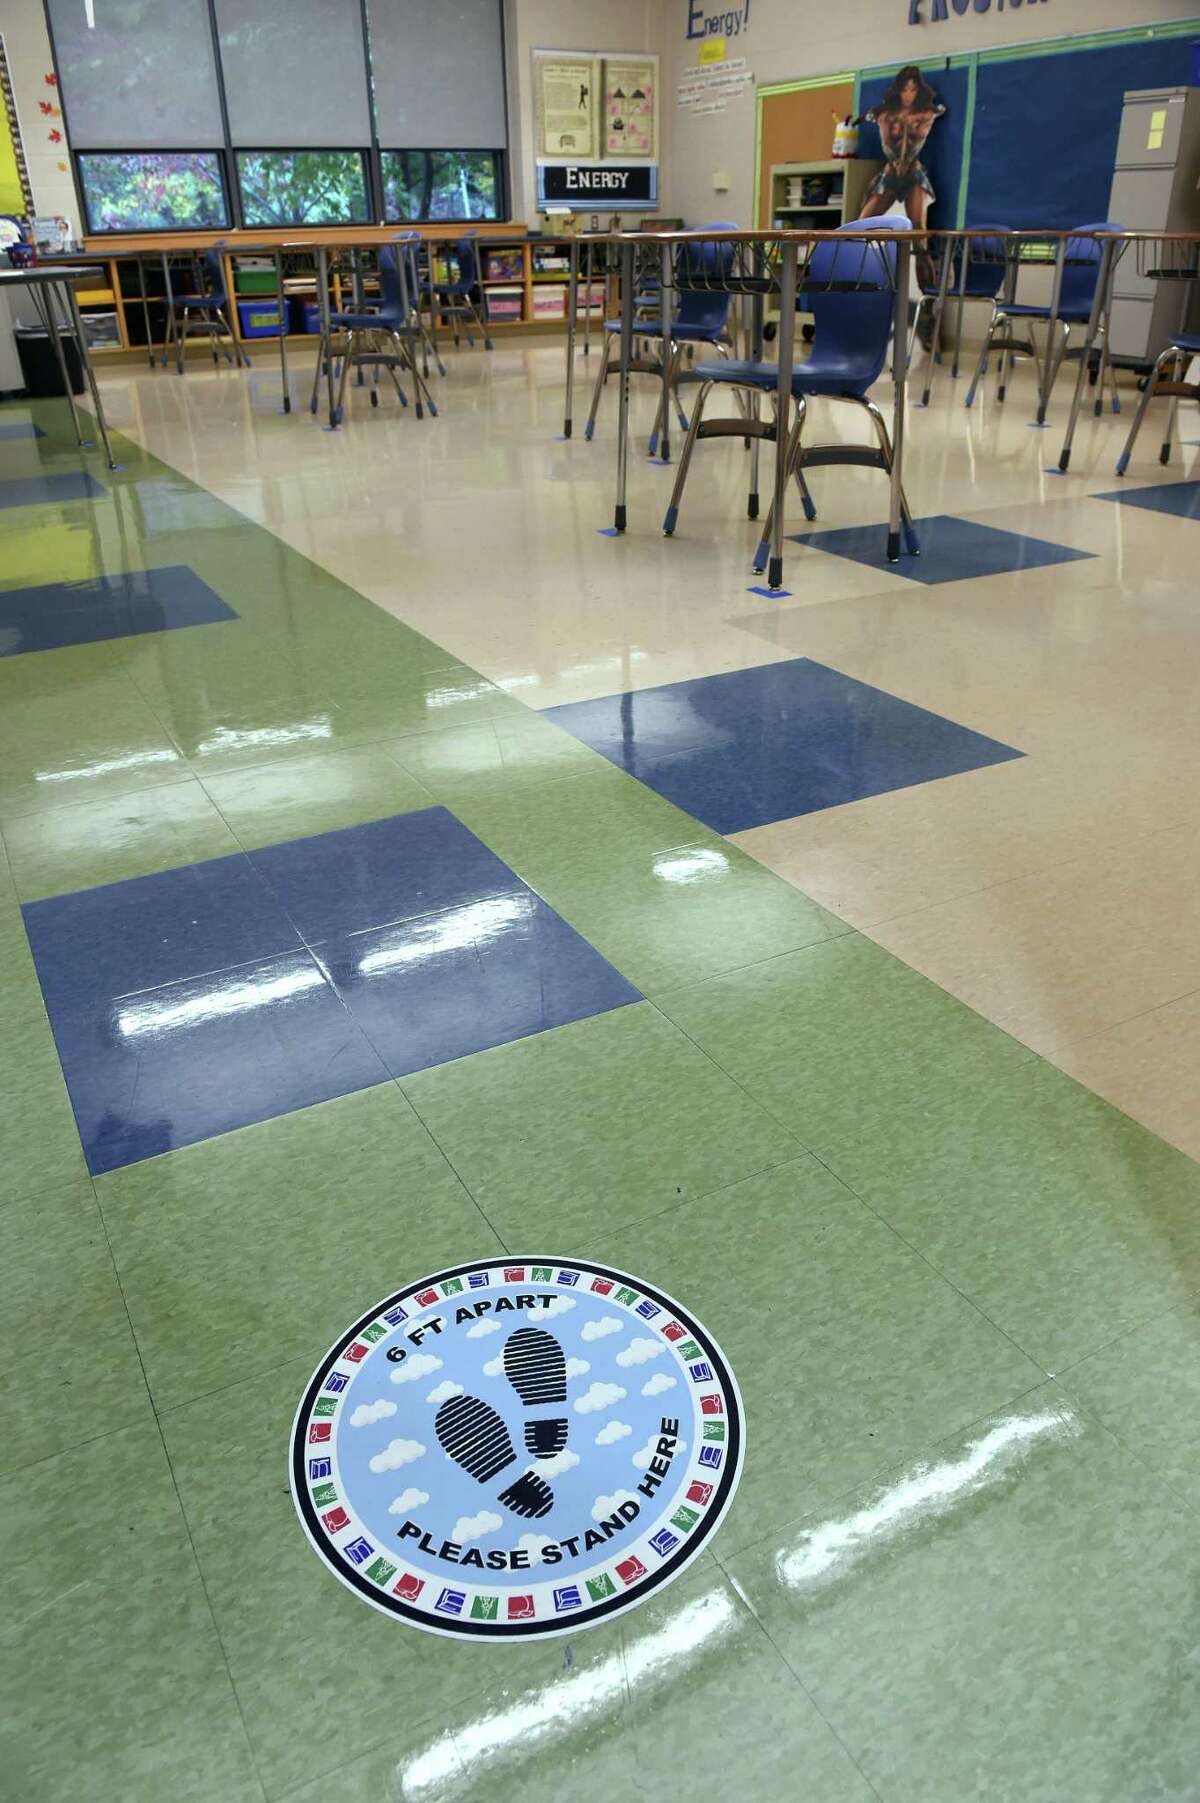 Social distancing reminders are affixed to the floors at Bishop Woods School in New Haven on October 16, 2020.